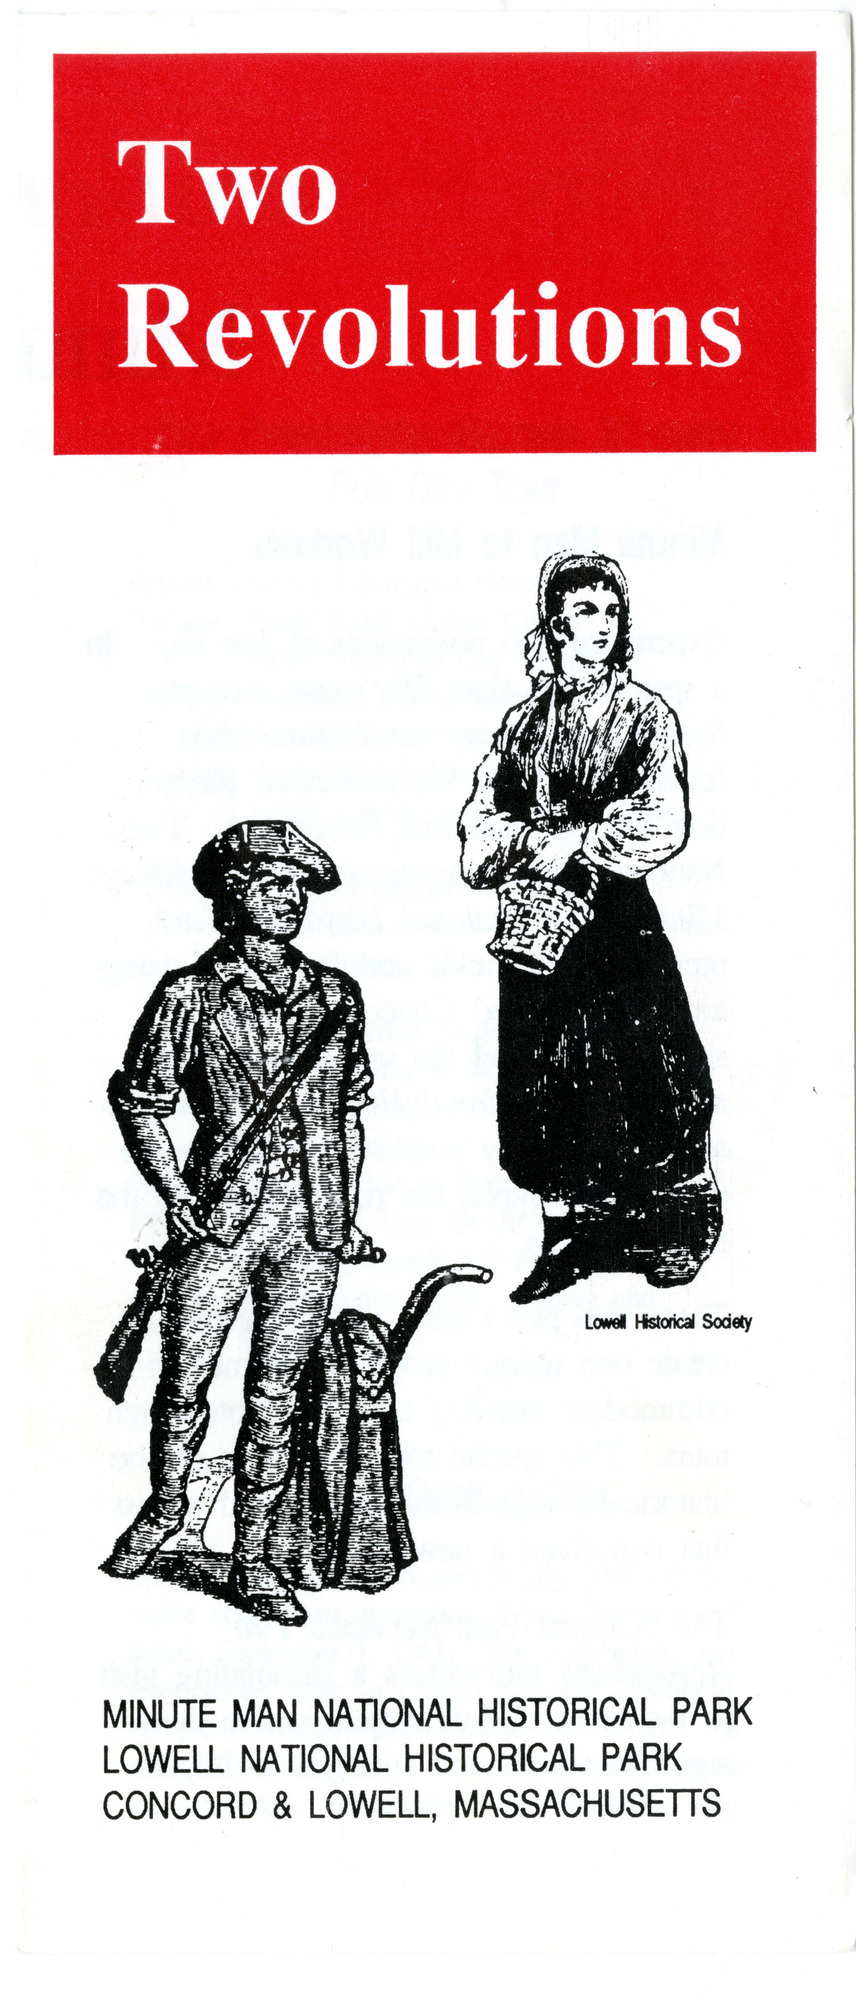 A flier illustration of a Minuteman colonist and a mill girl staring ahead.